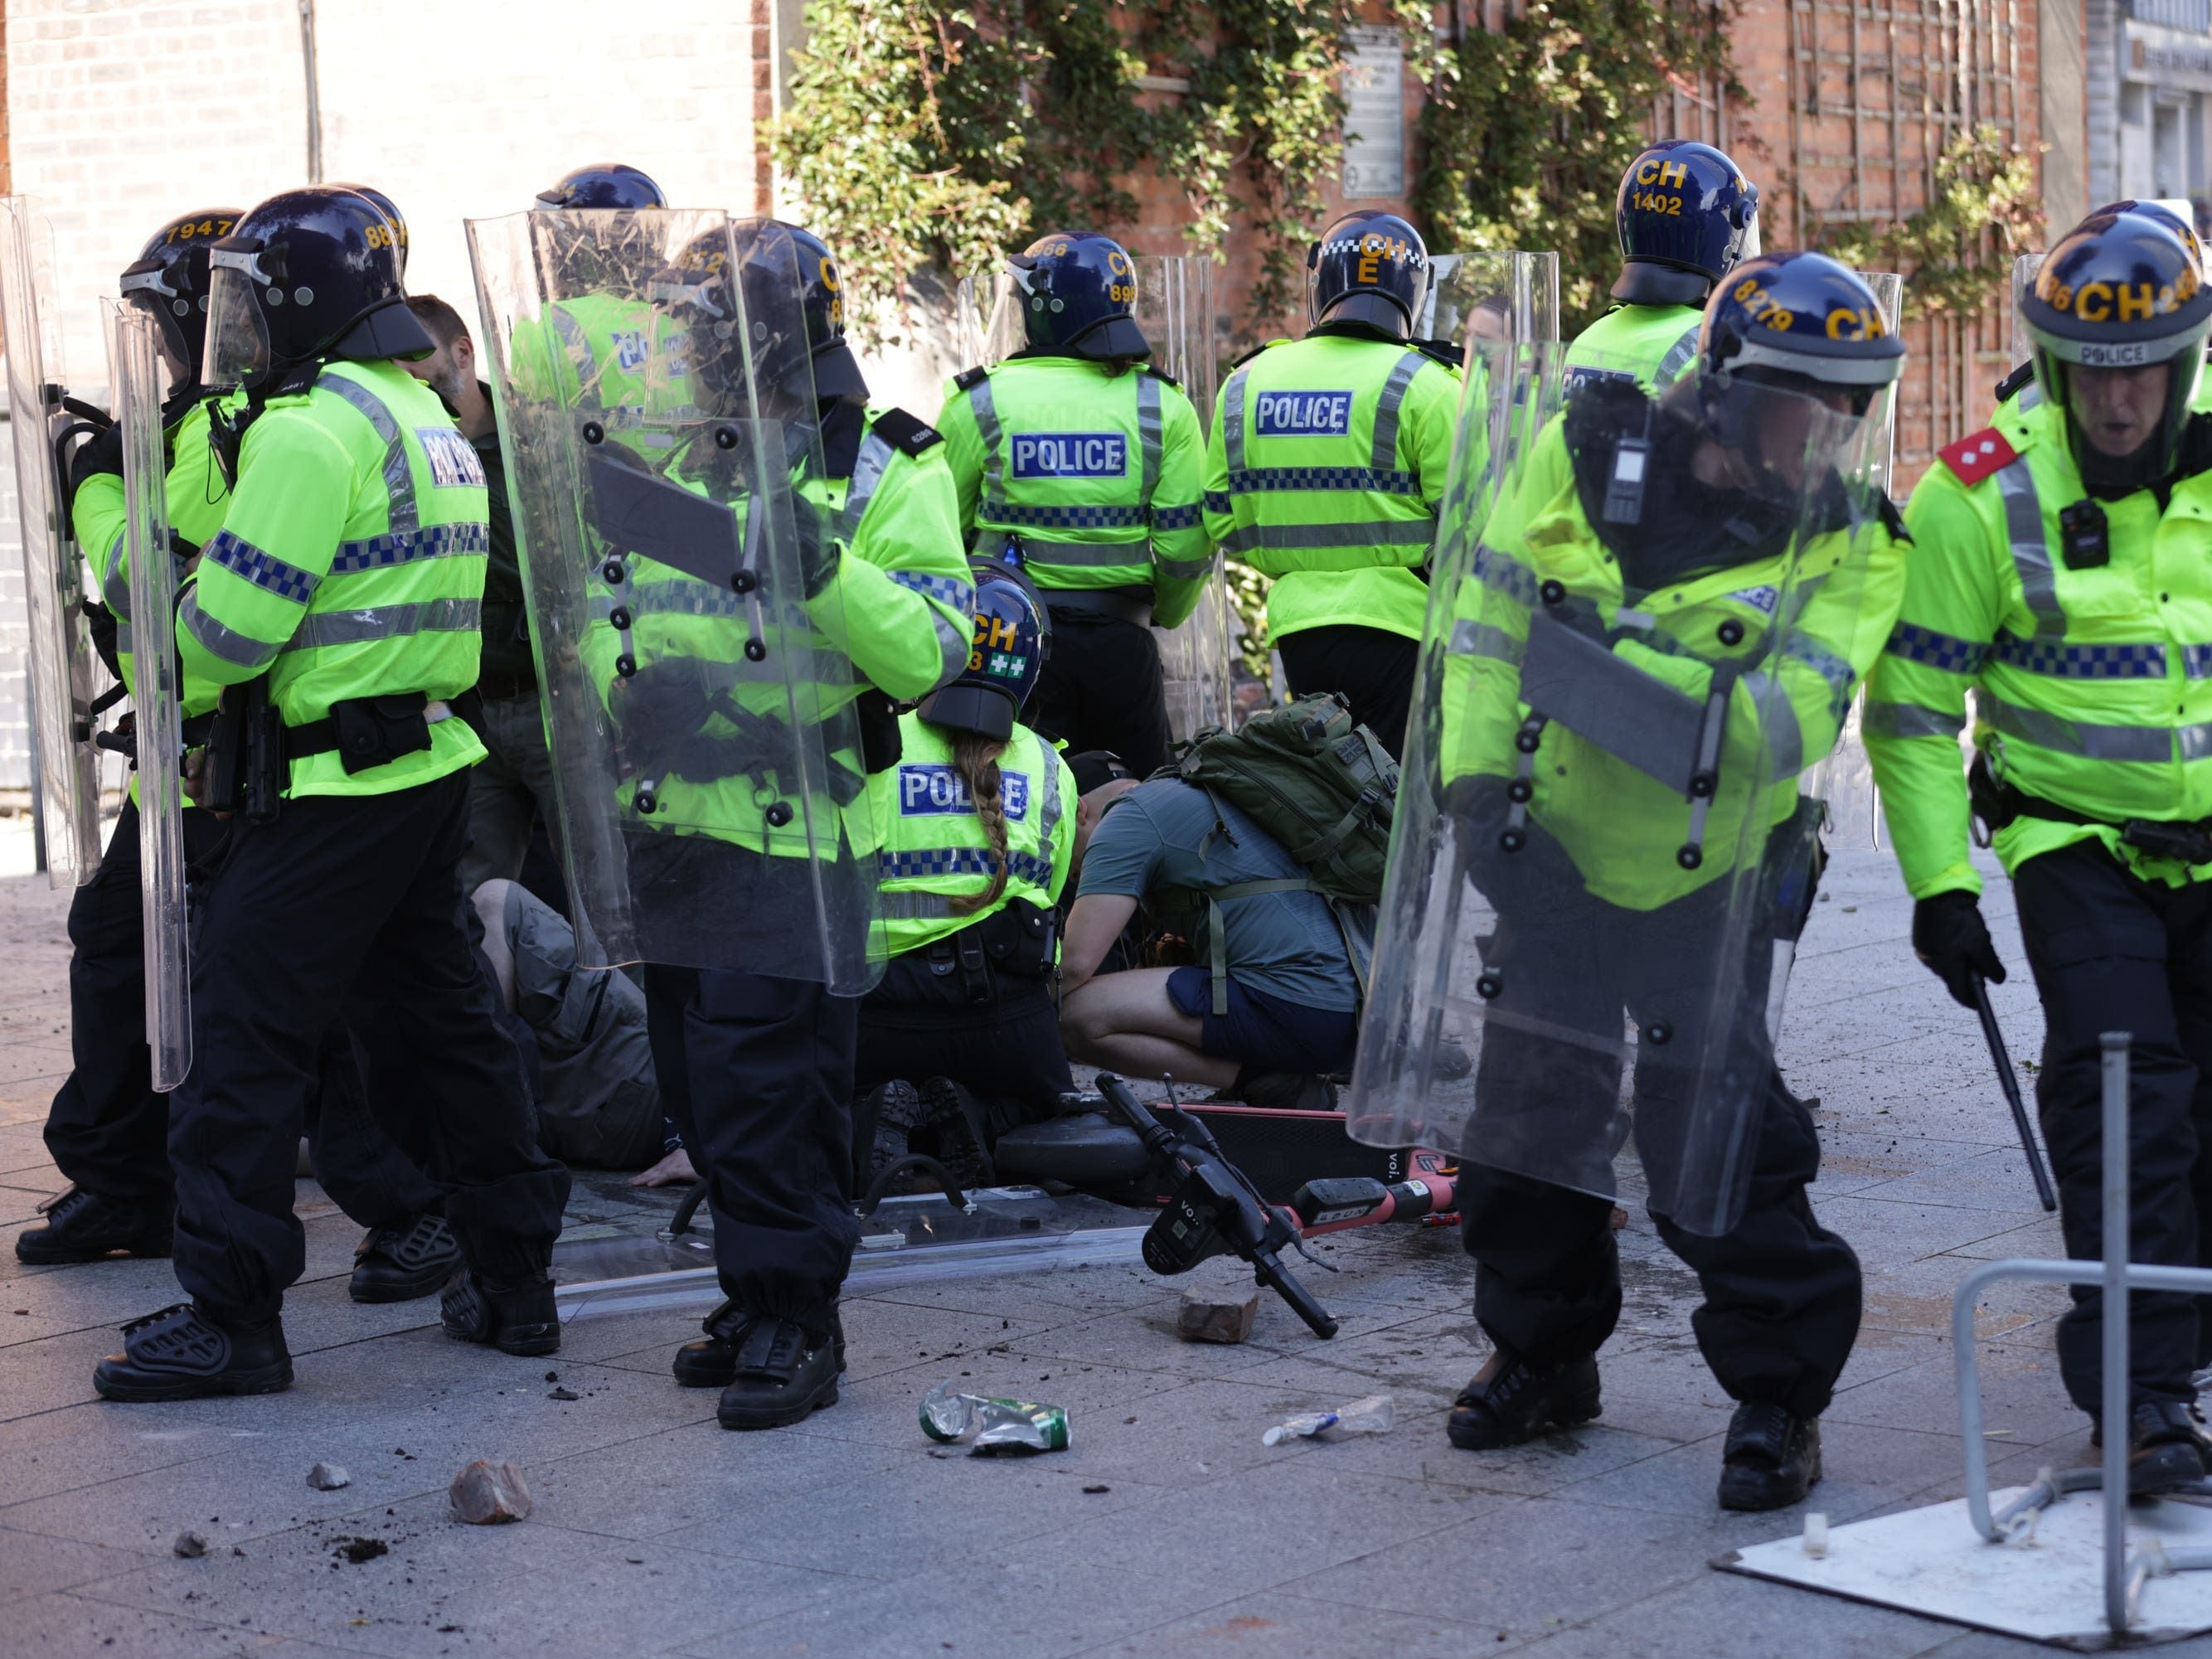 Violent protests see police officers injured as Prime Minister vows action